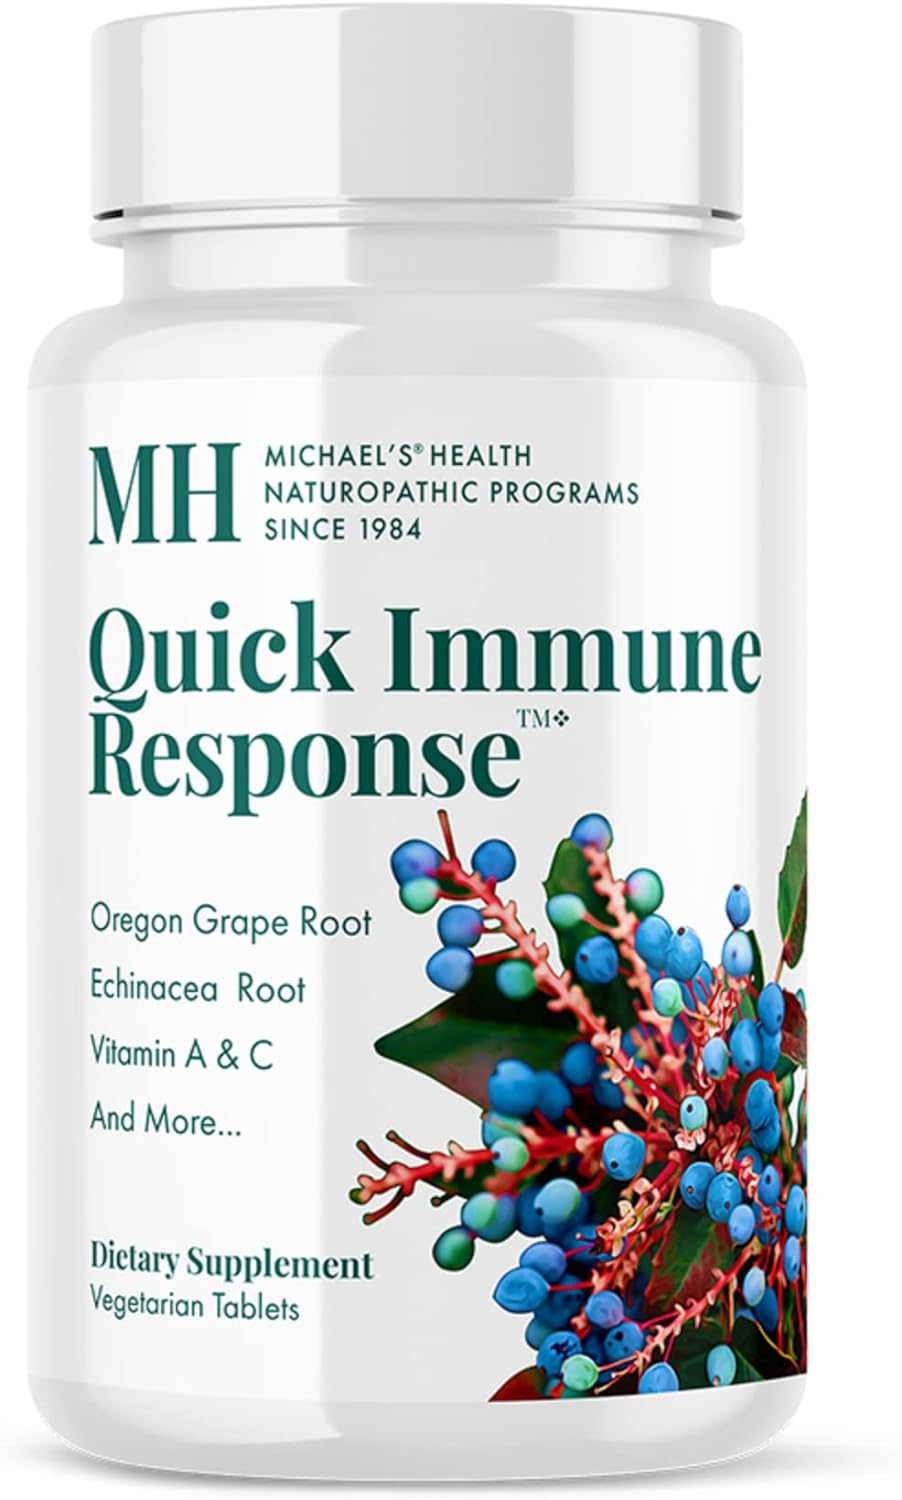 MICHAEL'S Health Naturopathic Programs Quick Immune Response - 120 Vegetarian Tablets - Immune System Support - with Vitamin A, Vitamin C & Zinc - 40 Servings